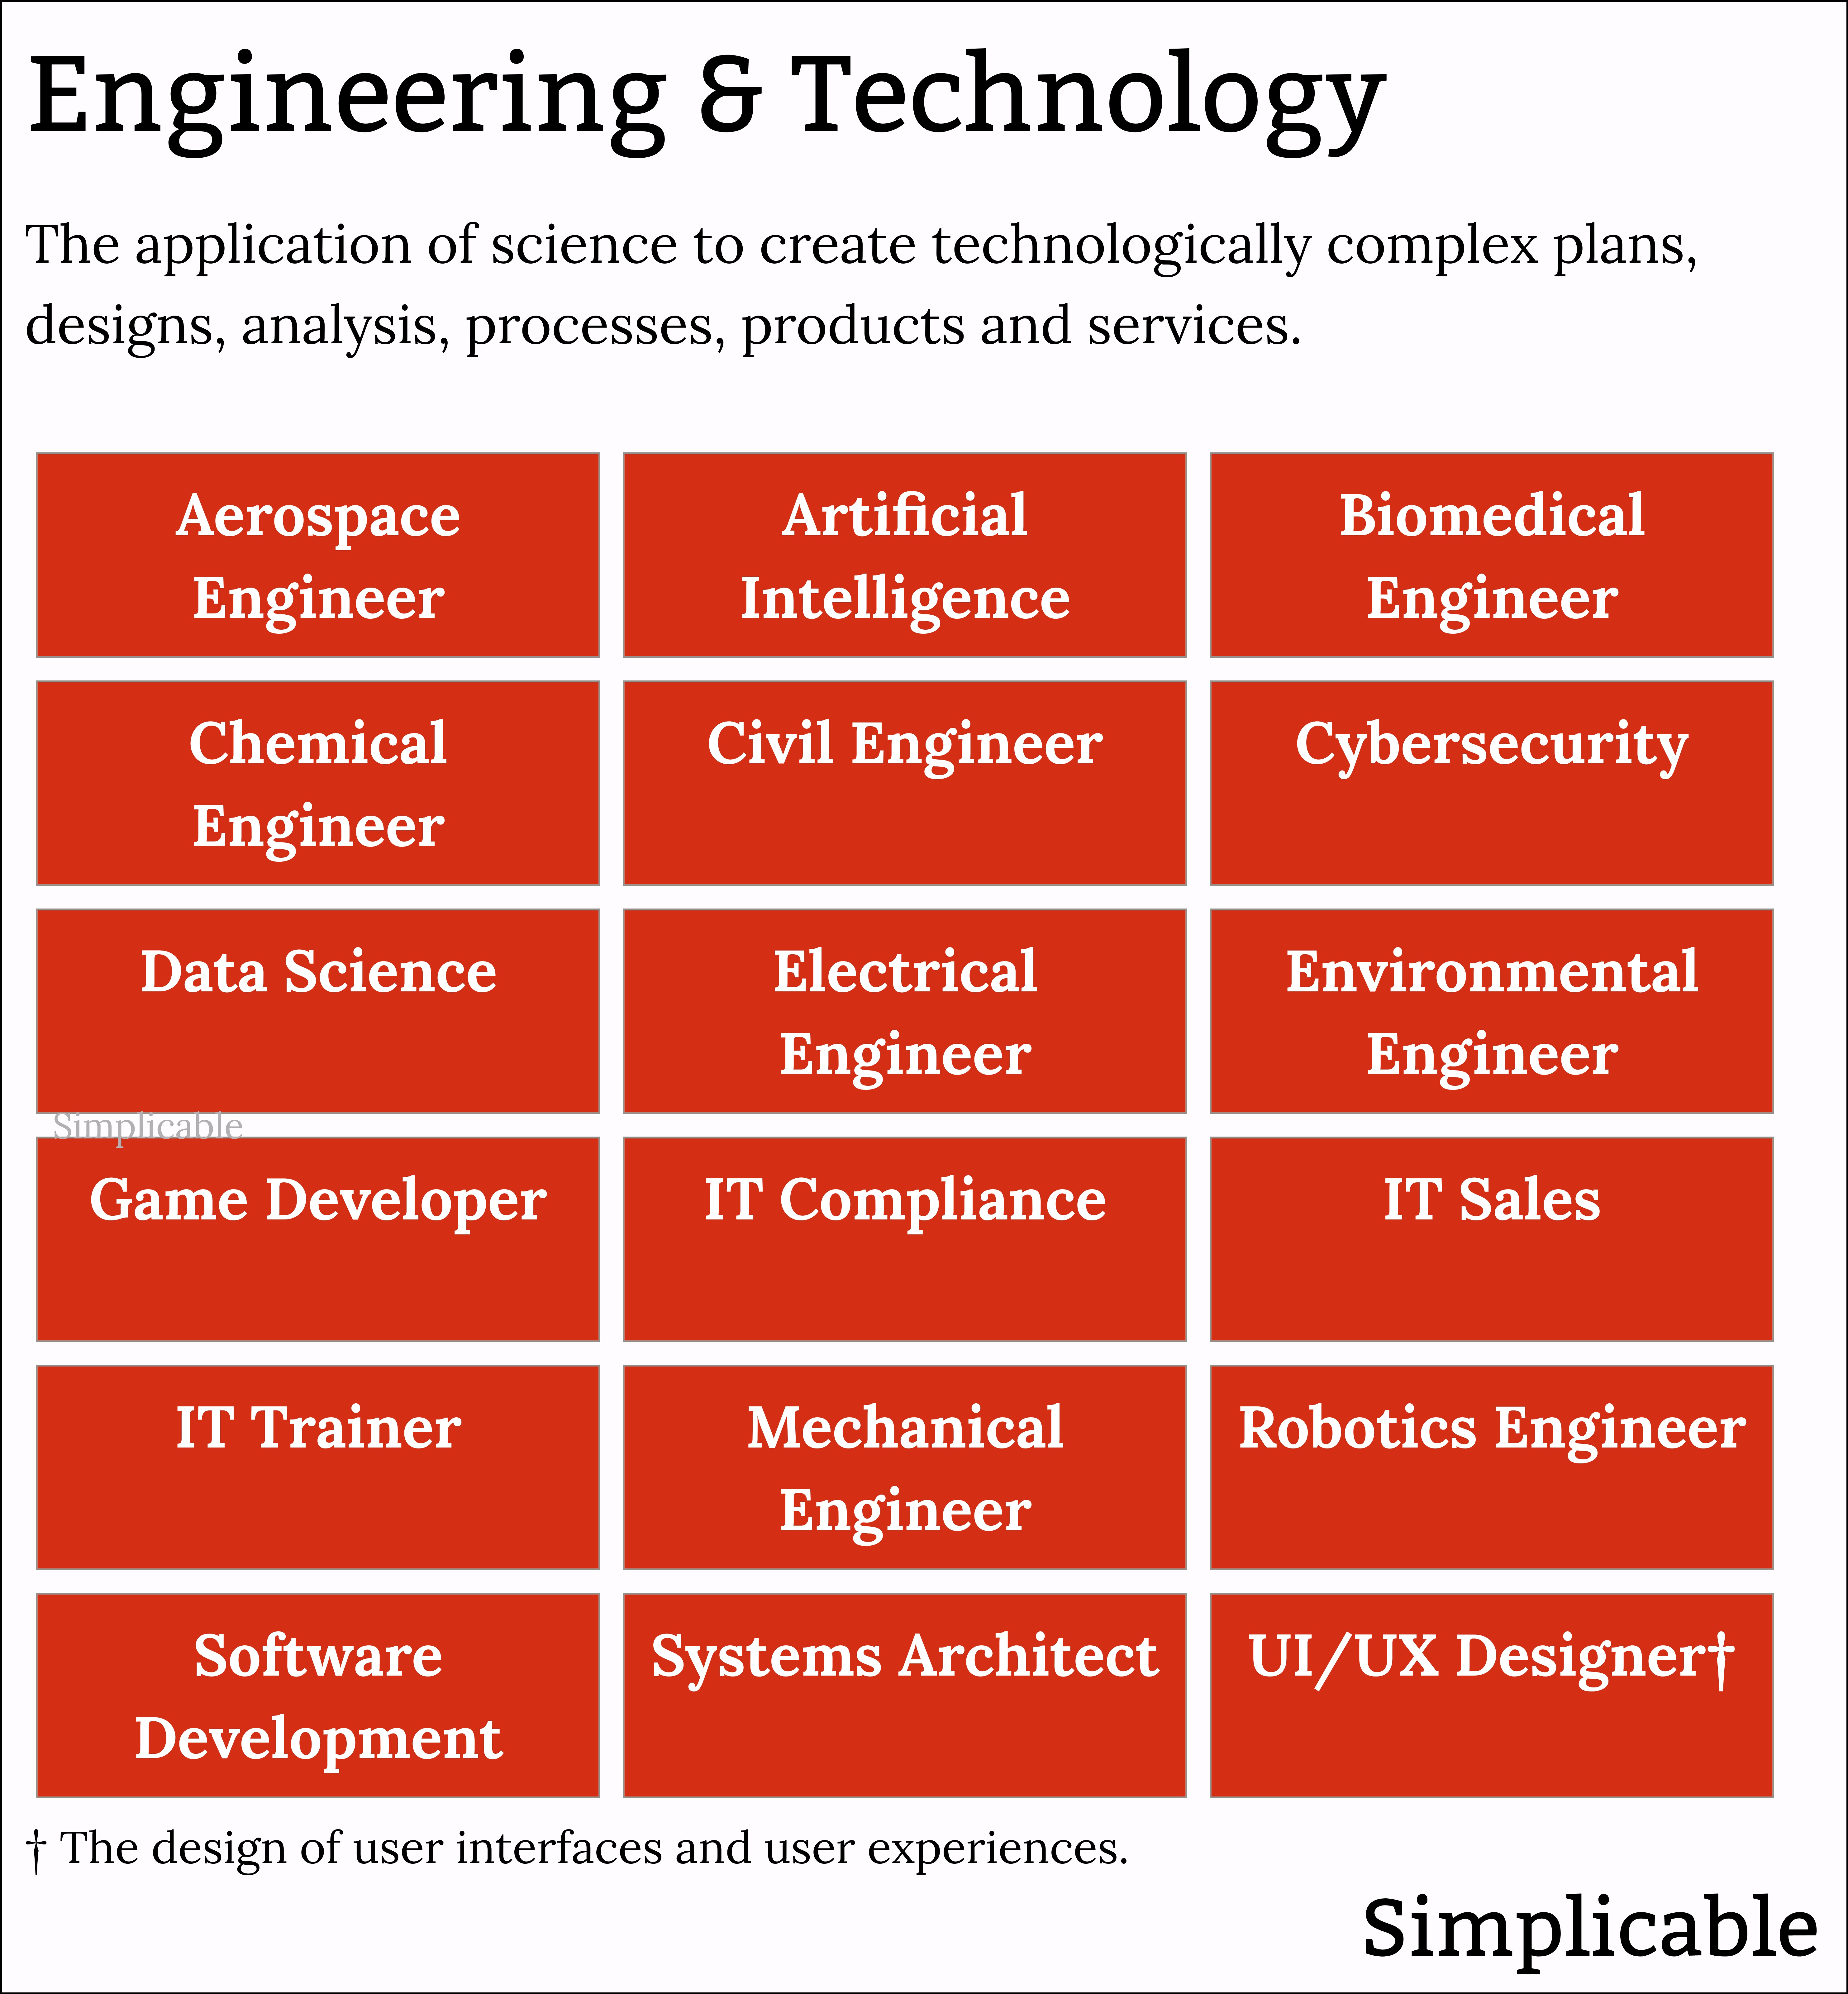 professions related to engineering and technology